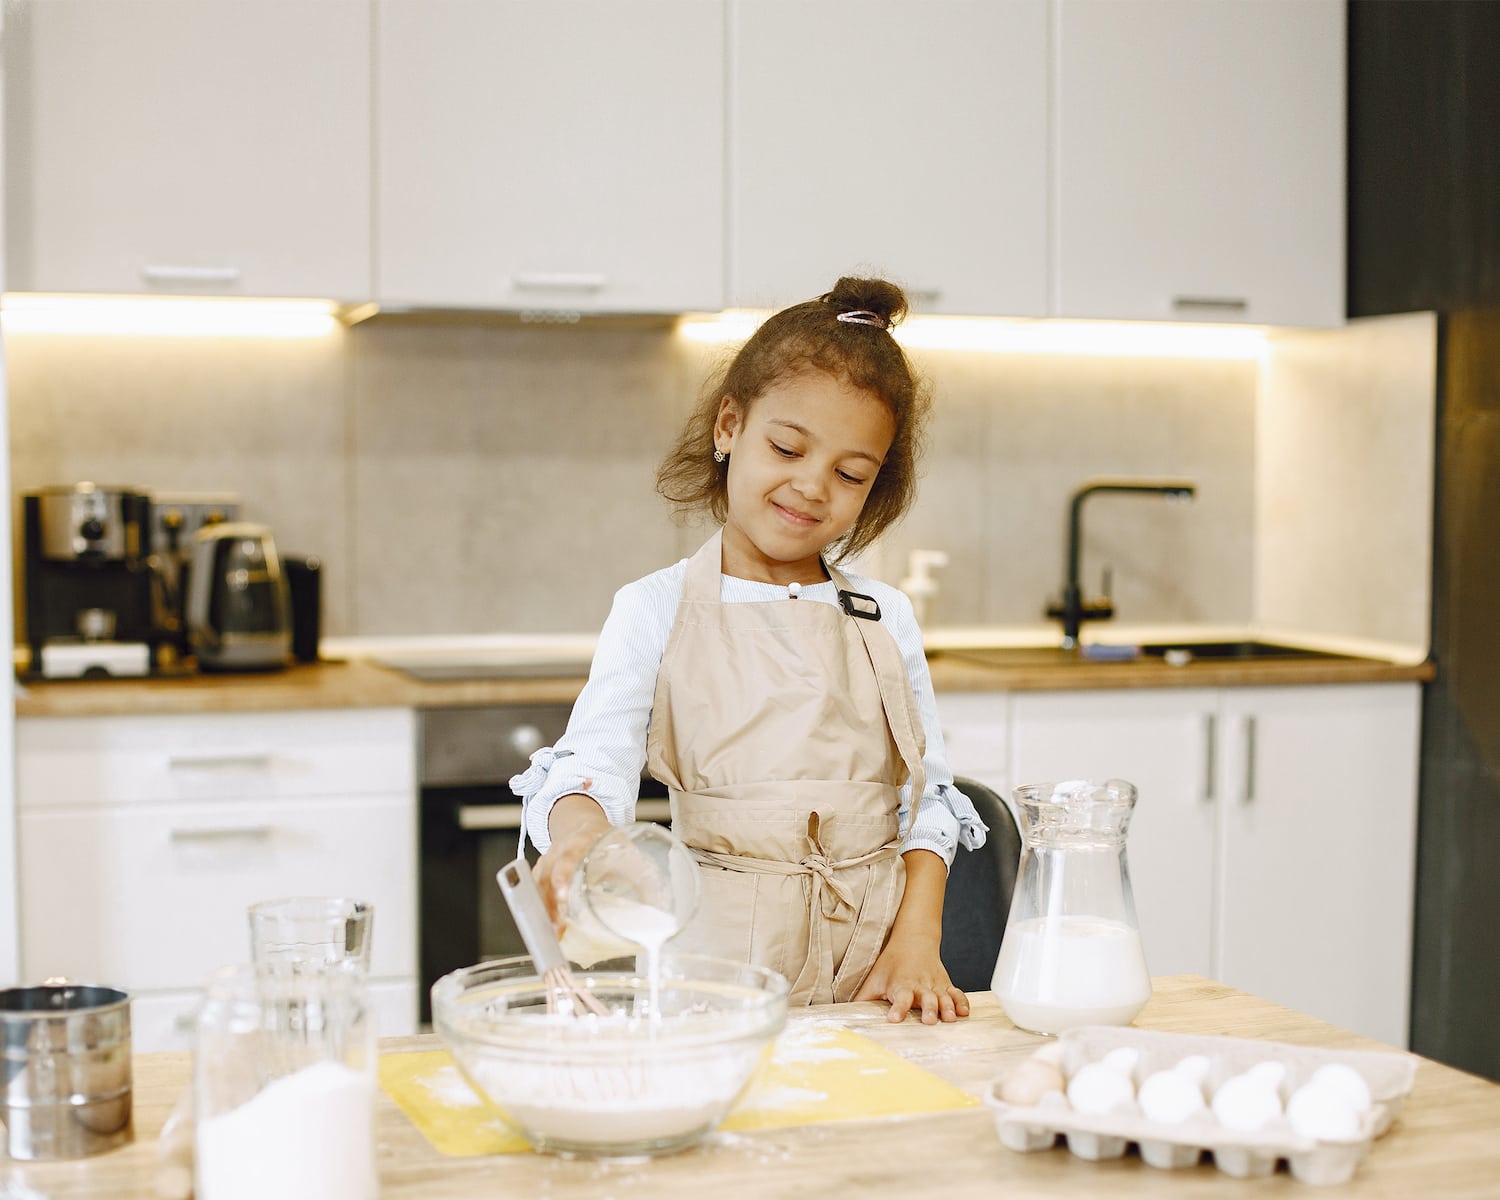 You are currently viewing Exciting recipes easy enough for kids to make